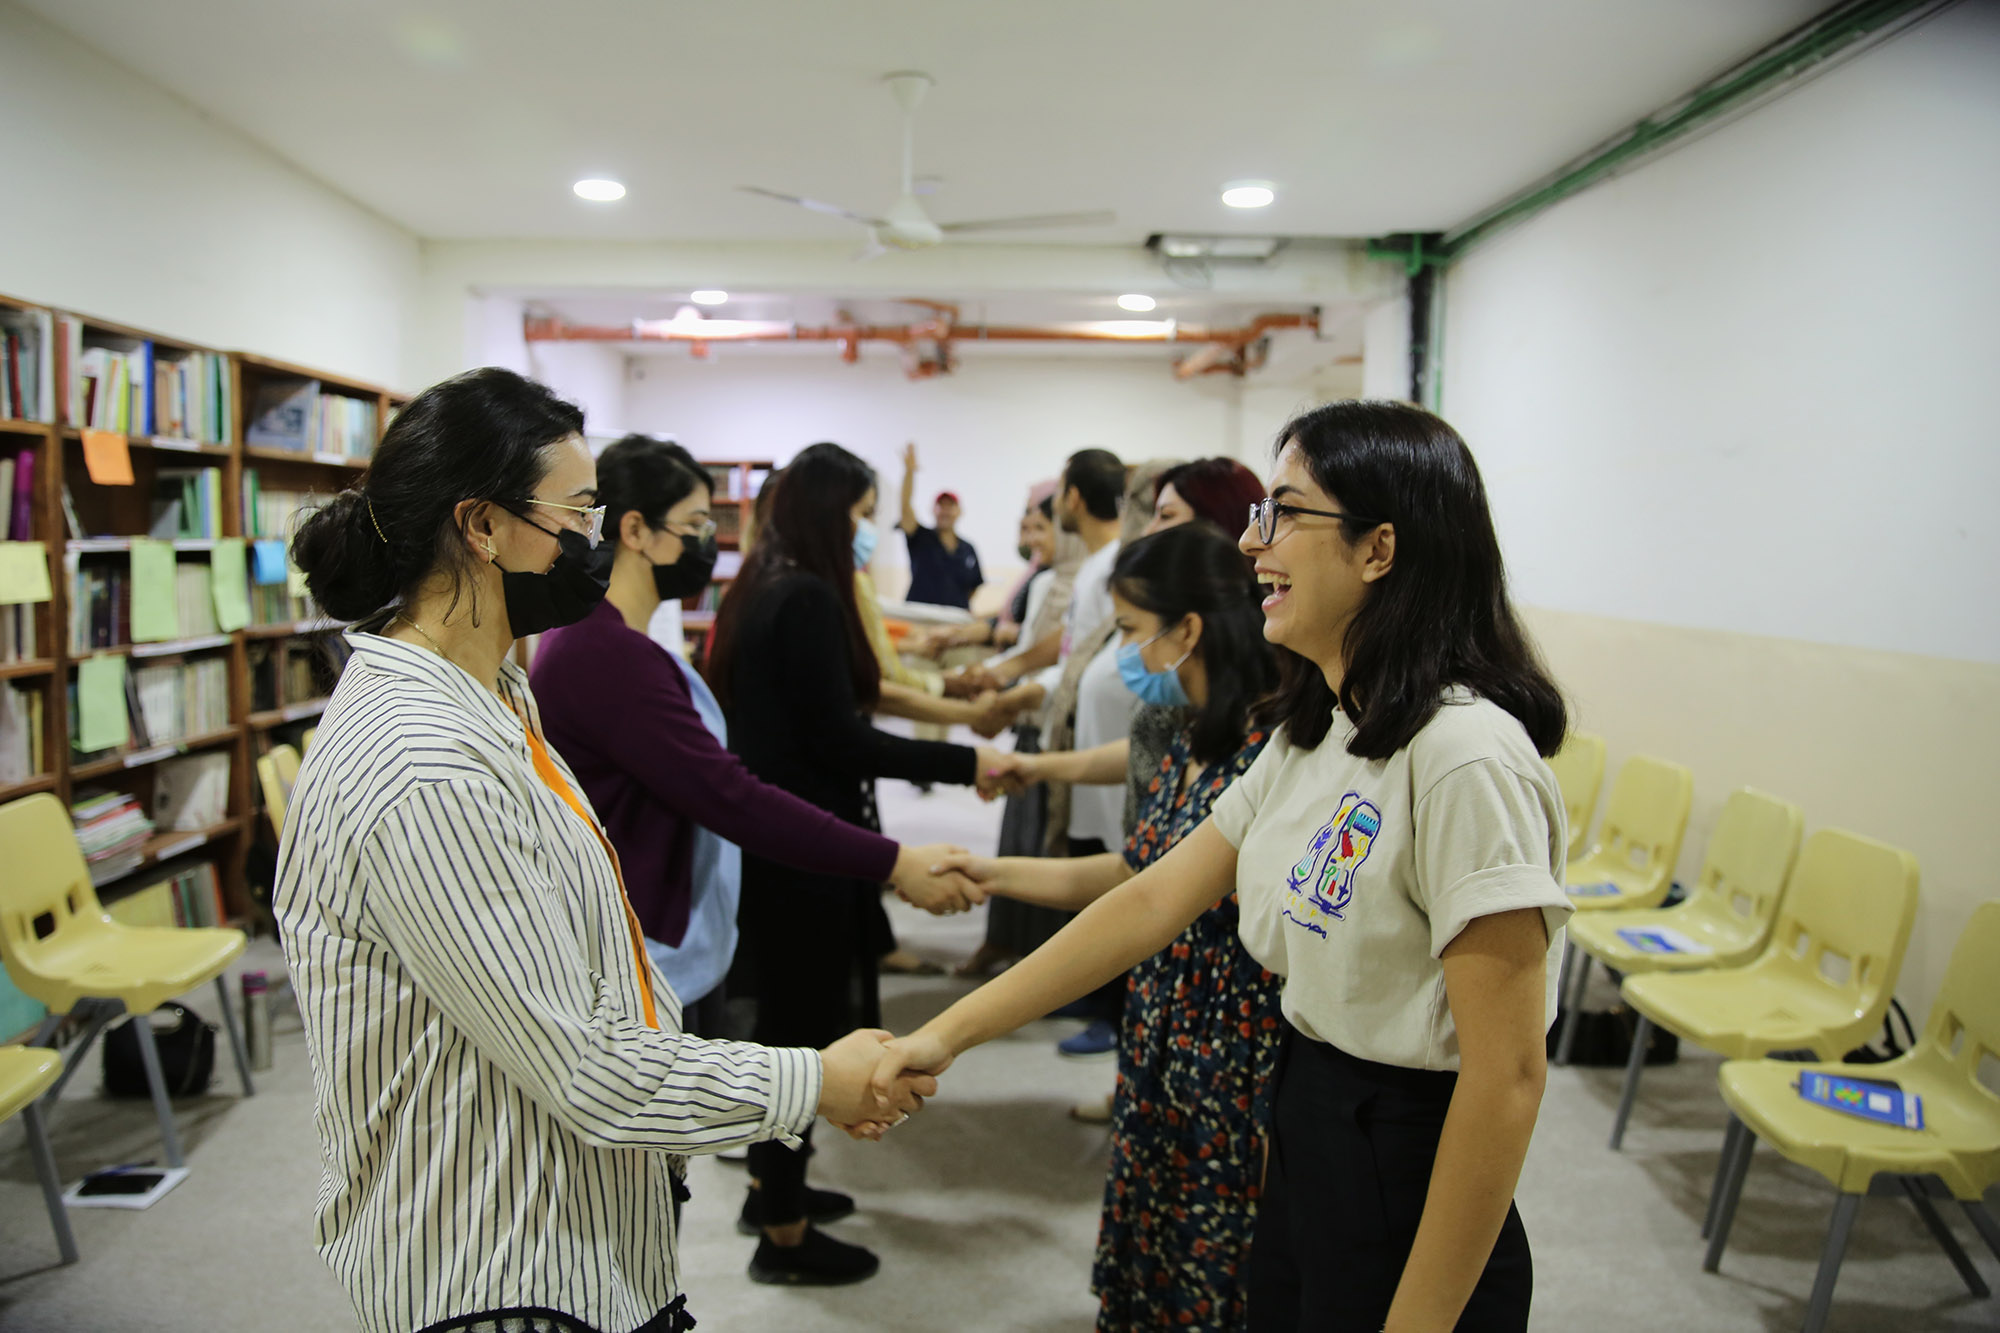 Iraqi Kurdistan: On August 27 and 28, CPT - IK led a Nonviolence workshop for 20 participants who are part of the “Together We Can Make Peace” project. CPT shared nonviolent methods on how to achieve peace and encourage social cohesion.